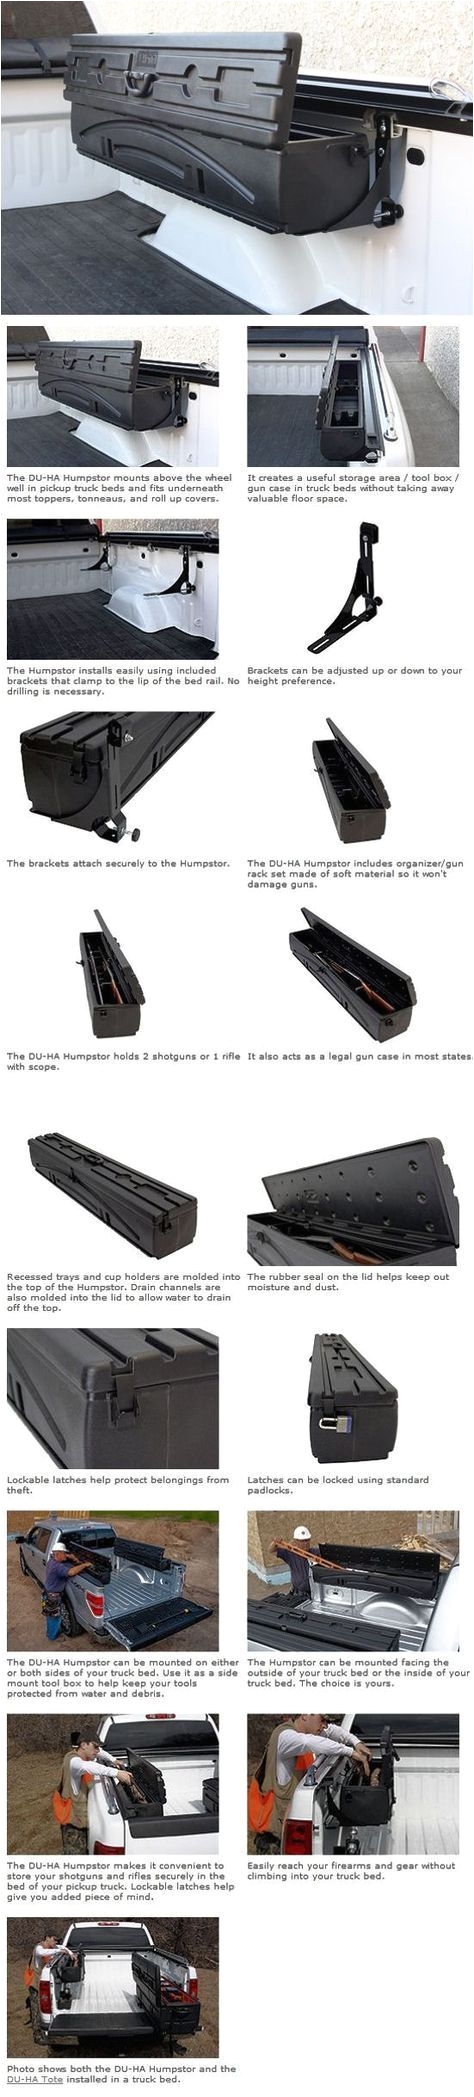 check out our truly amazing pickup all in one tool box that serves as a storage unit tool box and a gun case this truly unique and versatile too